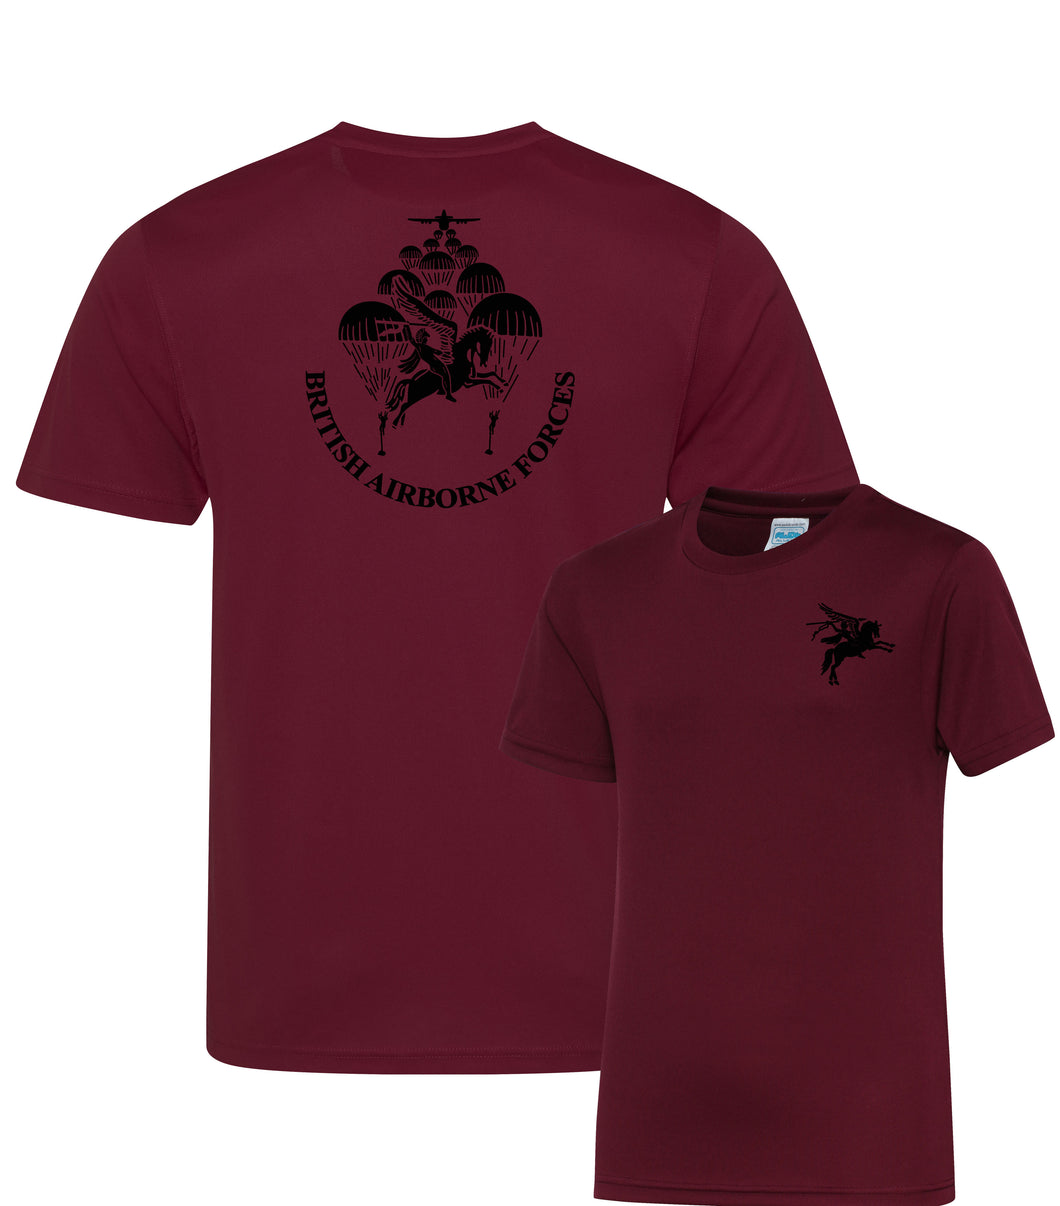 British Airborne forces Paratrooper - Fully Printed Wicking Fabric T-shirt